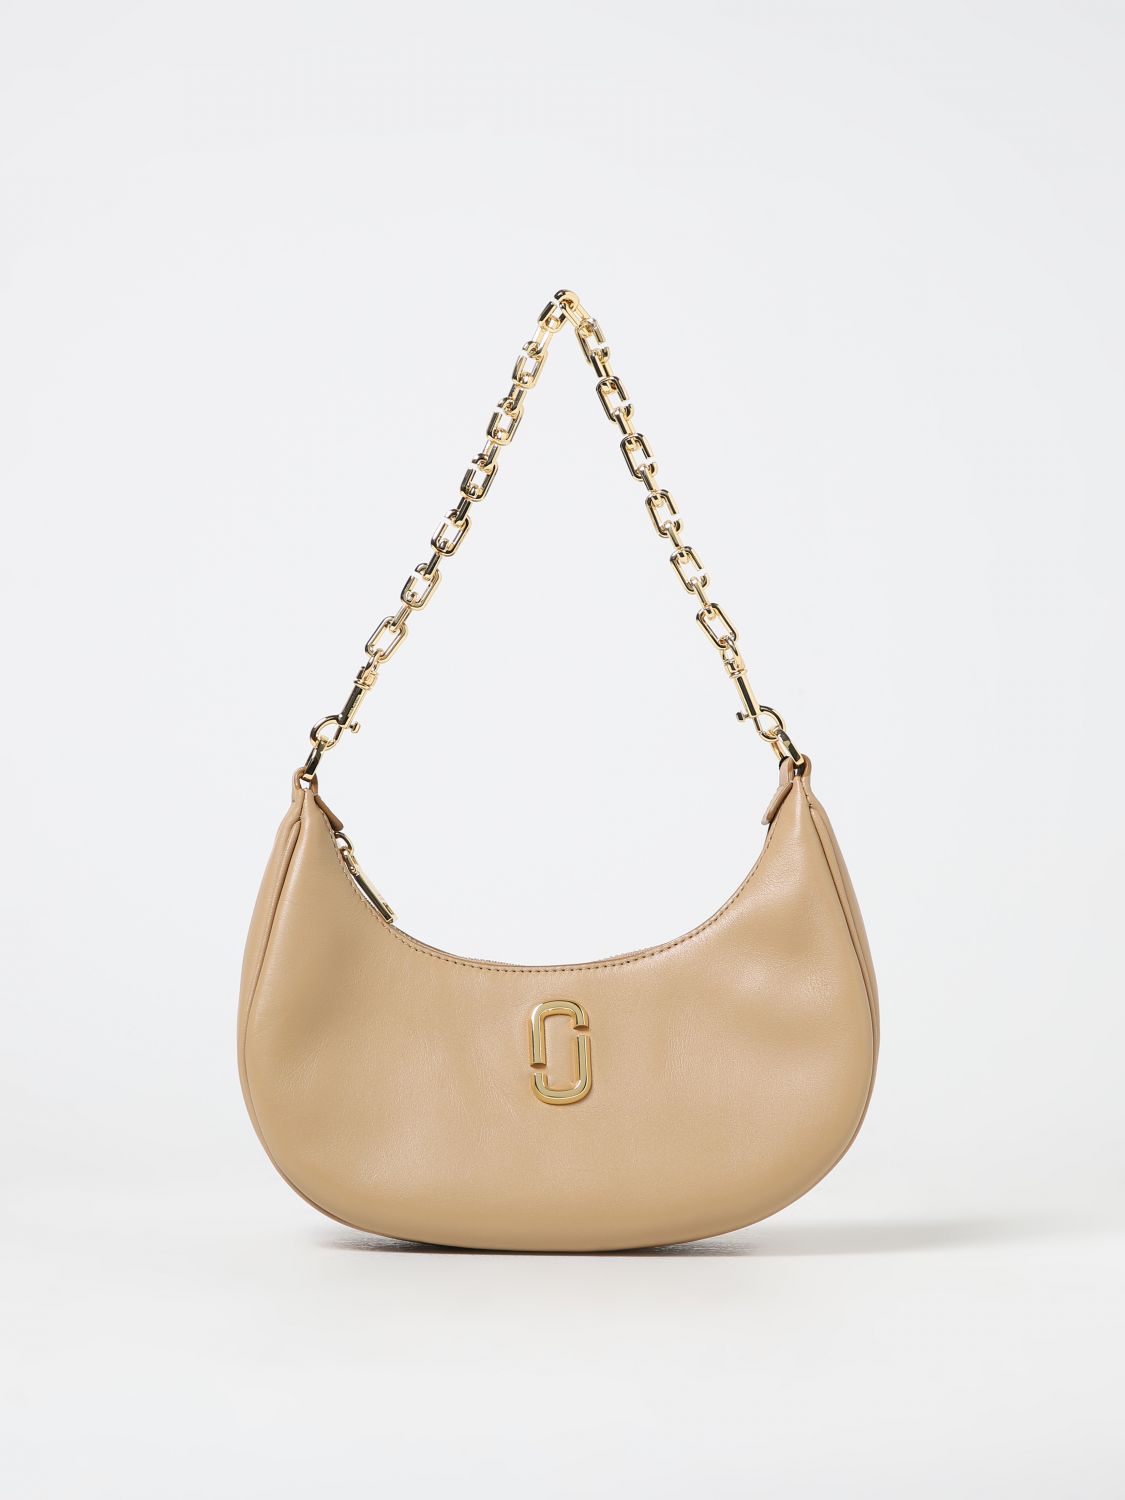 MARC JACOBS THE CURVE BAG IN LEATHER,F09936032